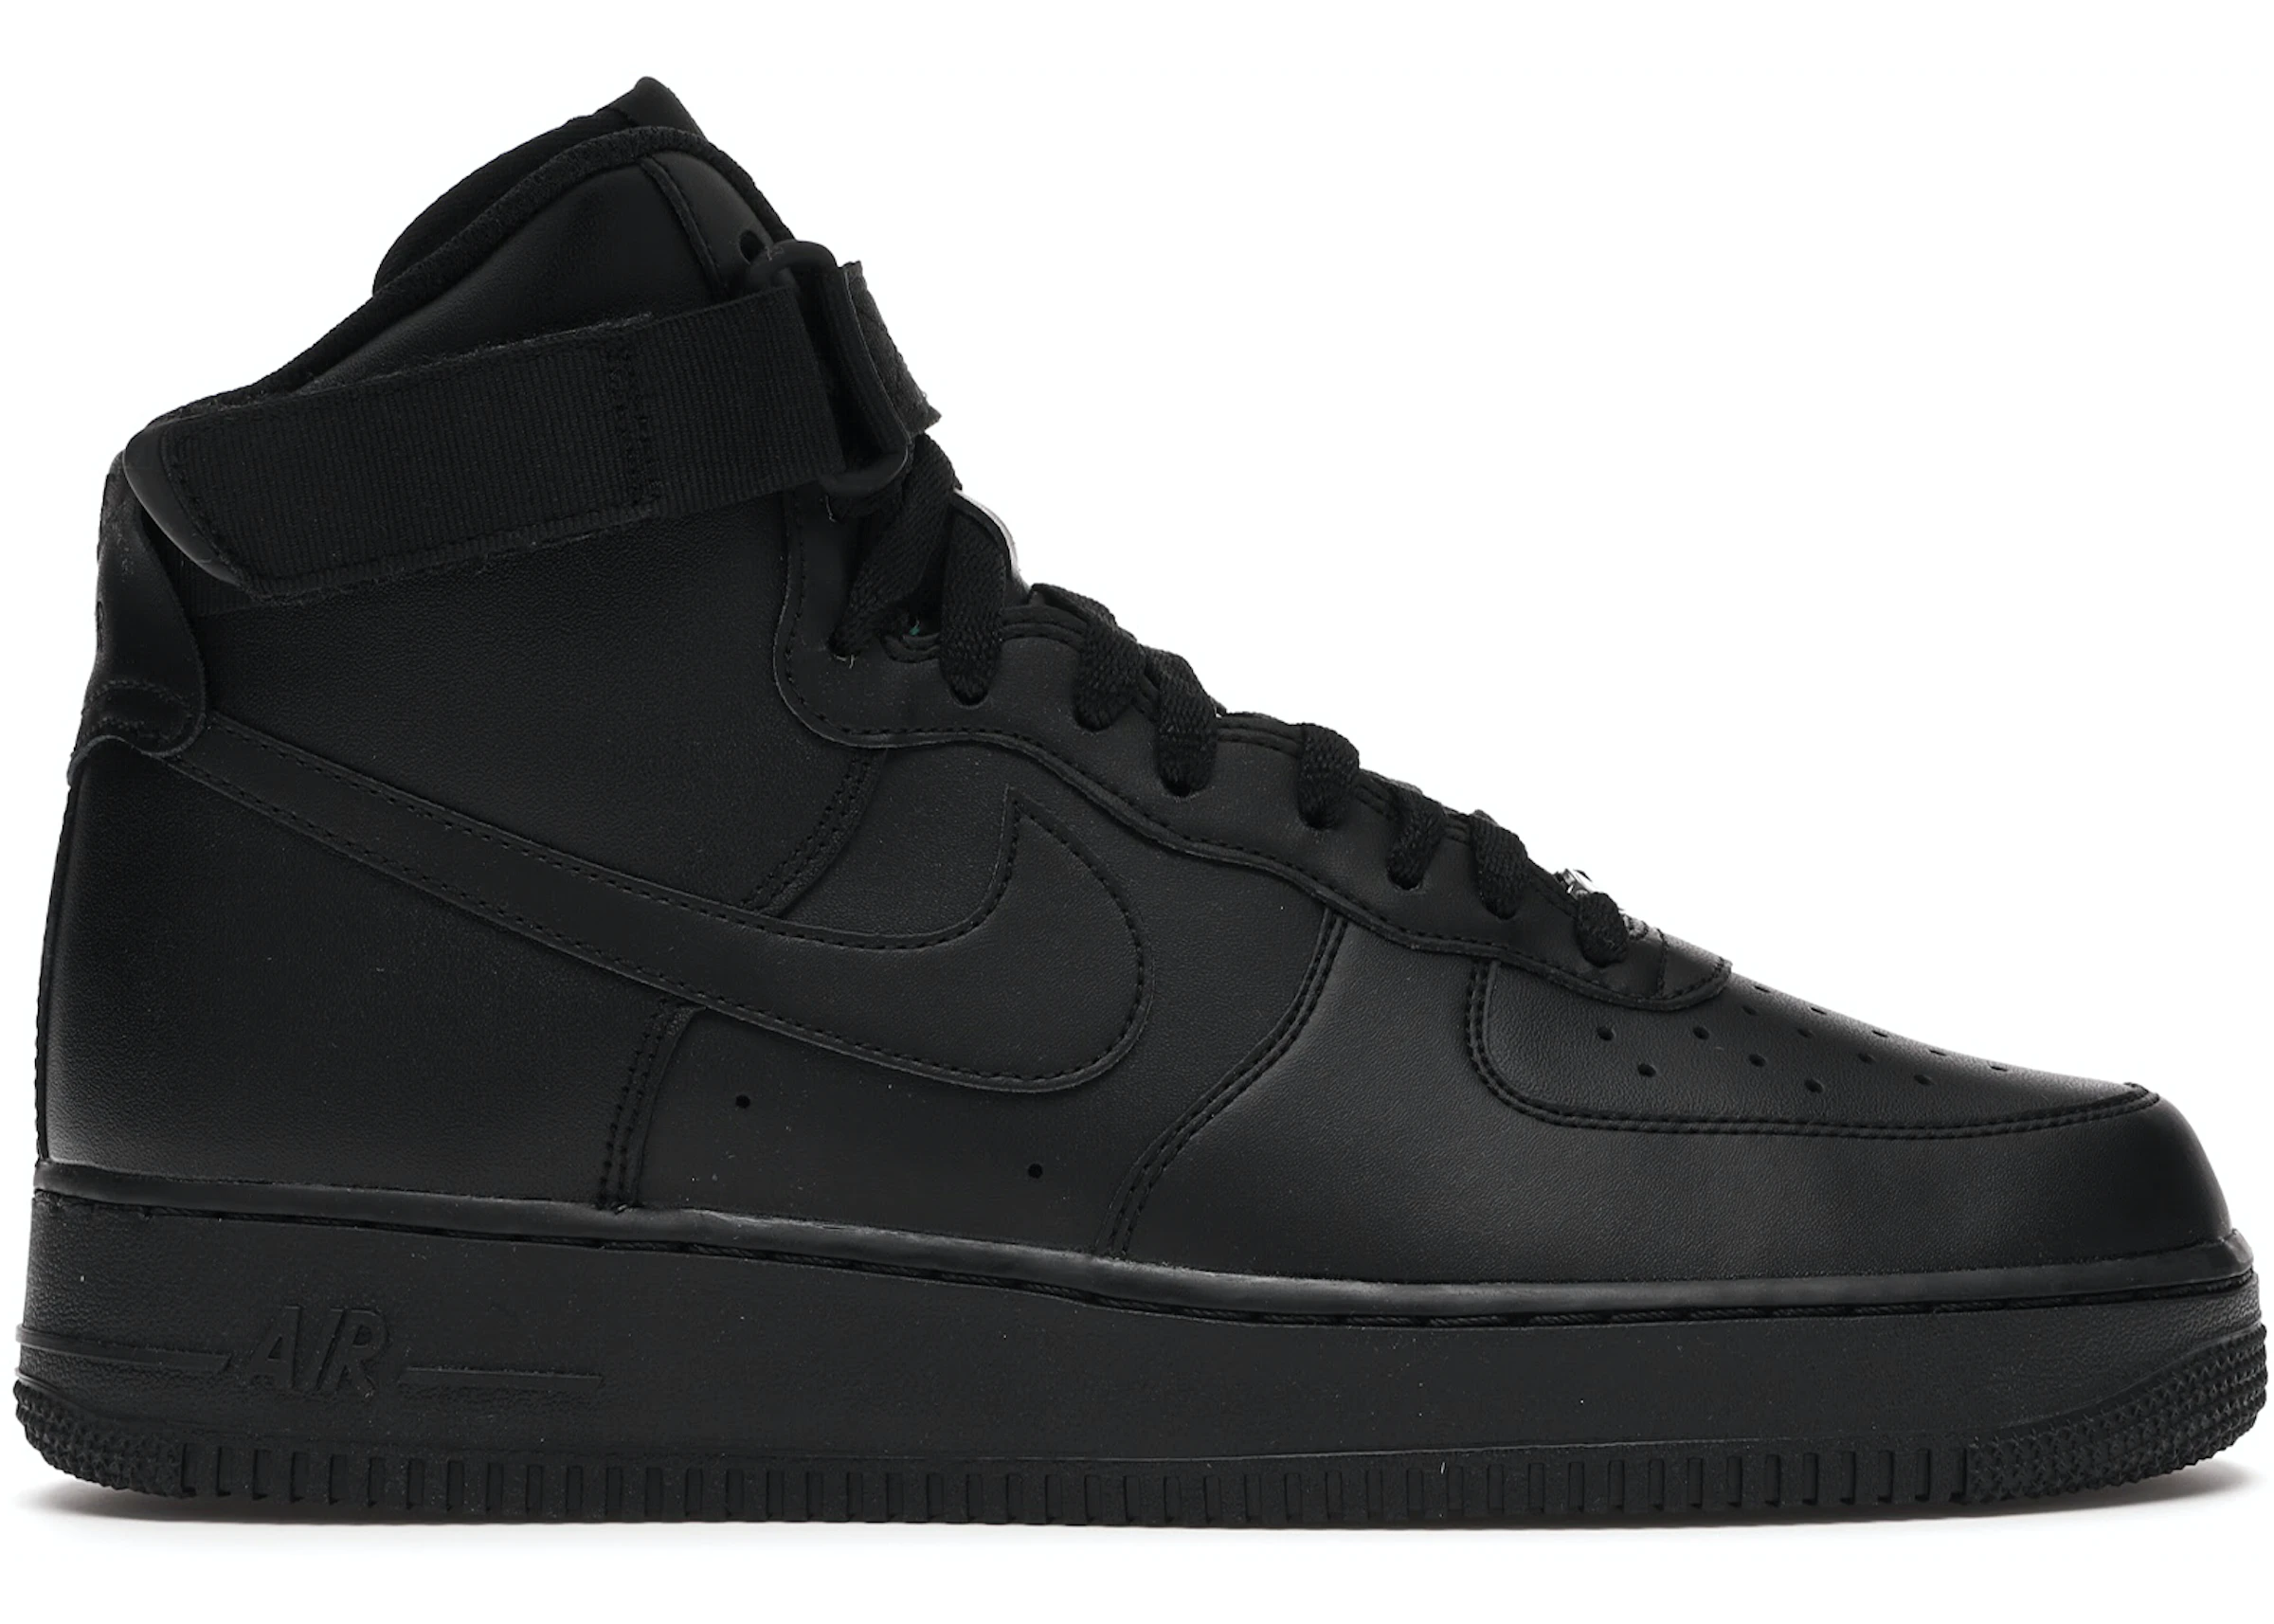 Hunger Actively Scrutinize Nike Air Force 1 High Triple Black (2017/2020) - 315121-032/CW2290-001 - US